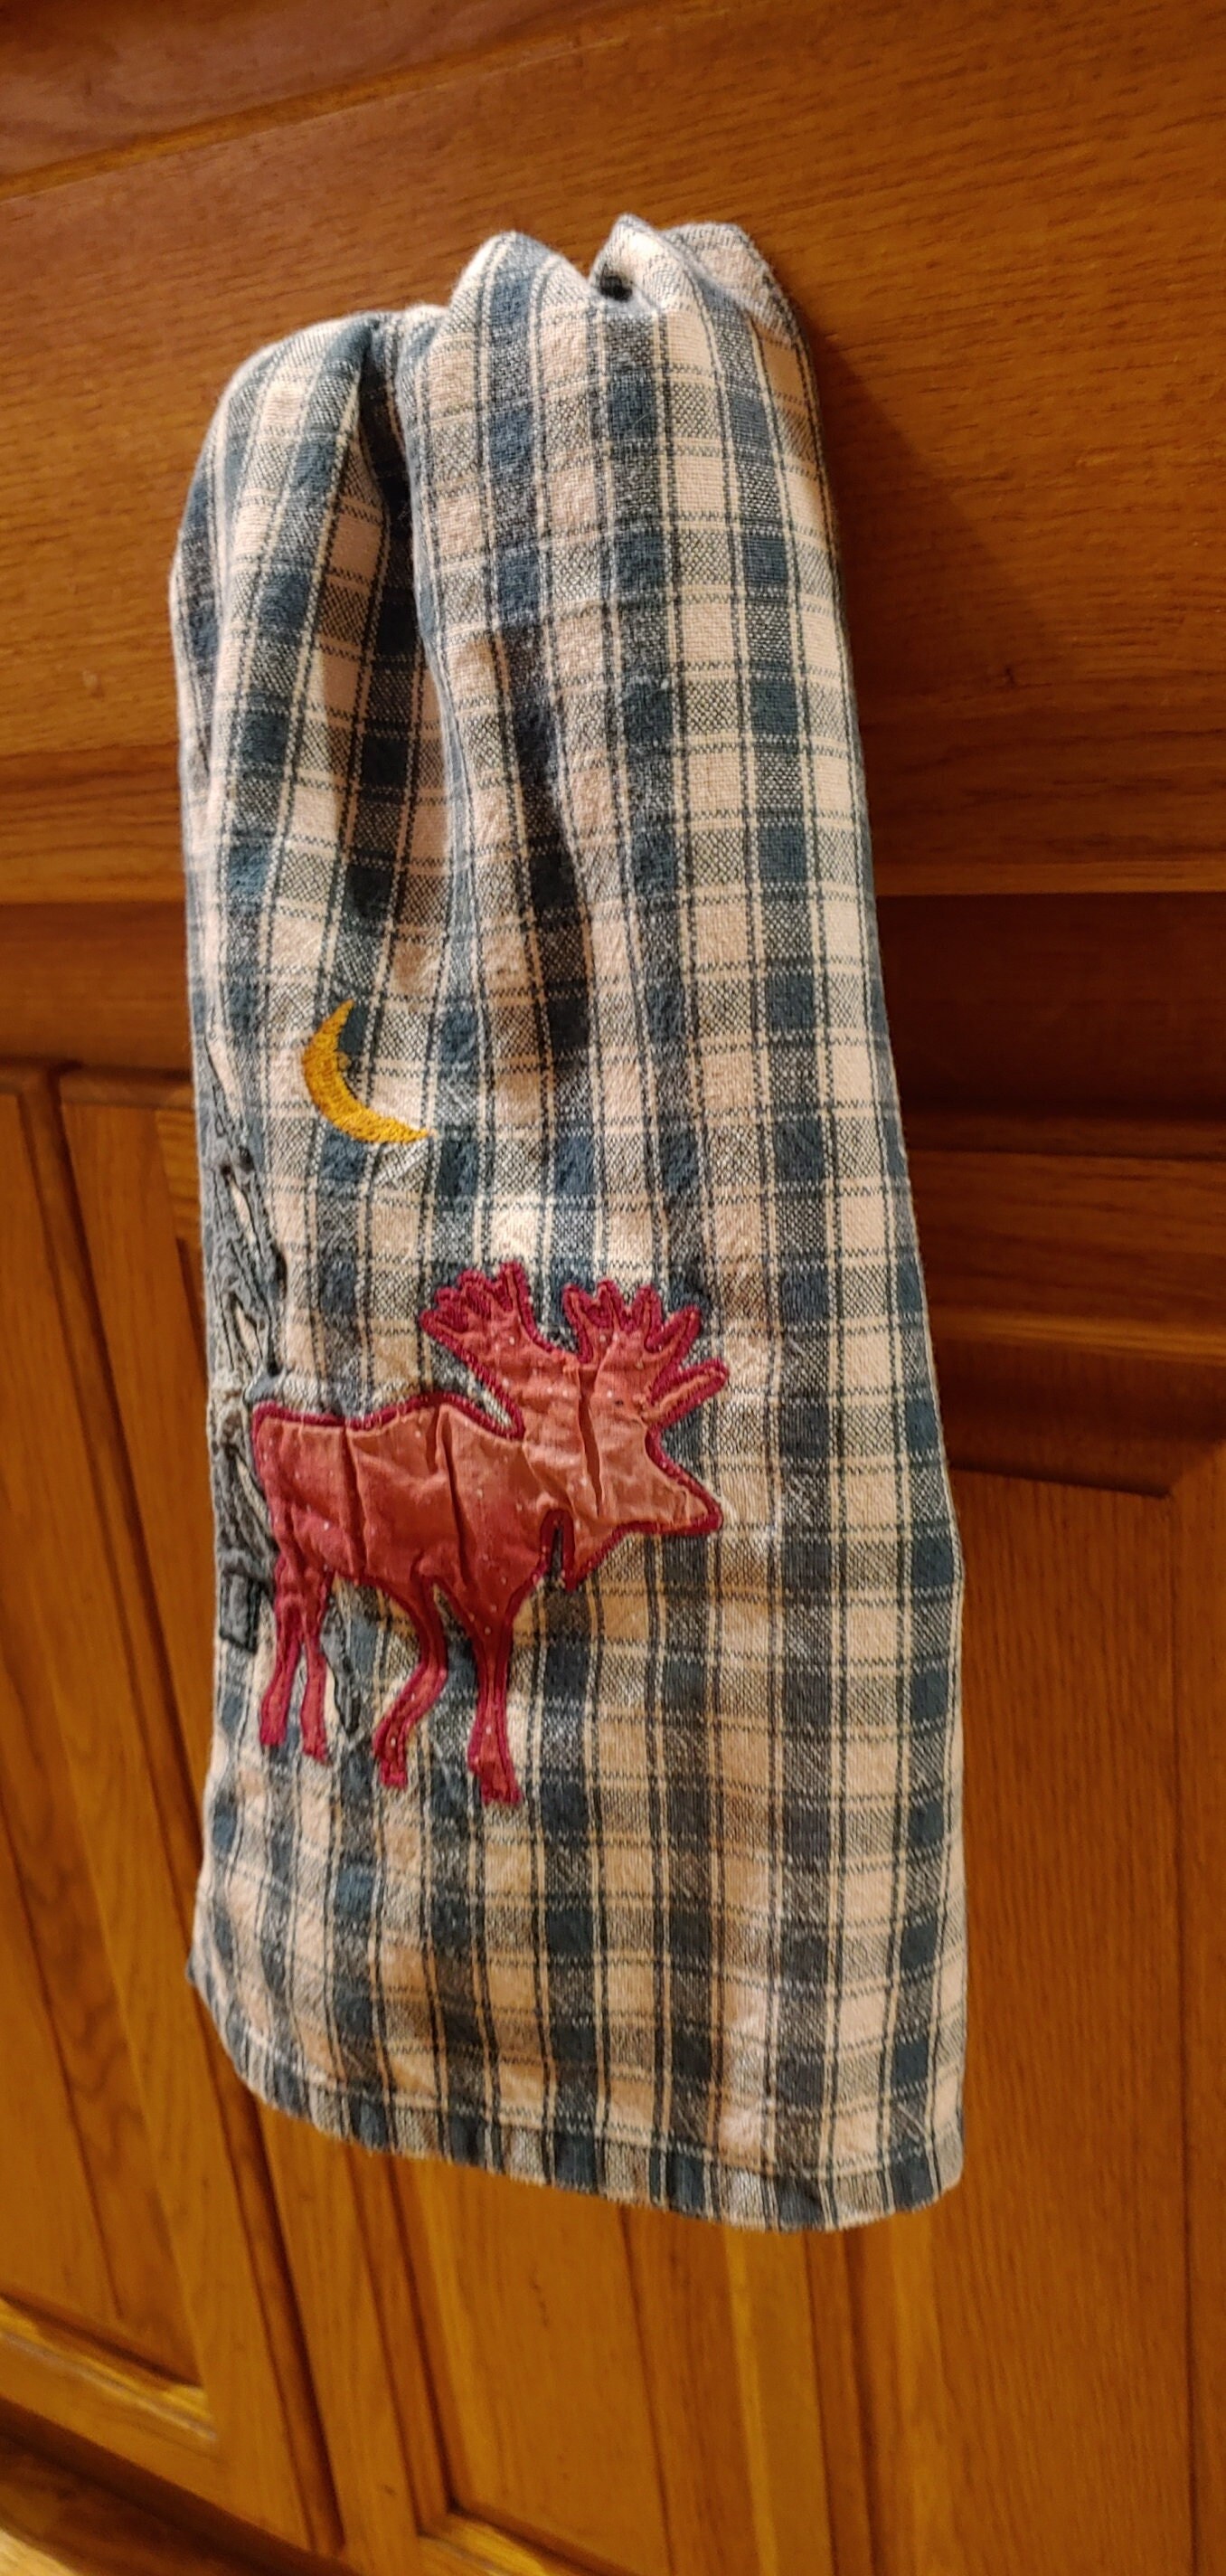 Moose Hand Towel Cabin Themed Kitchen Towels with Animals Lodge White  Dishcloth